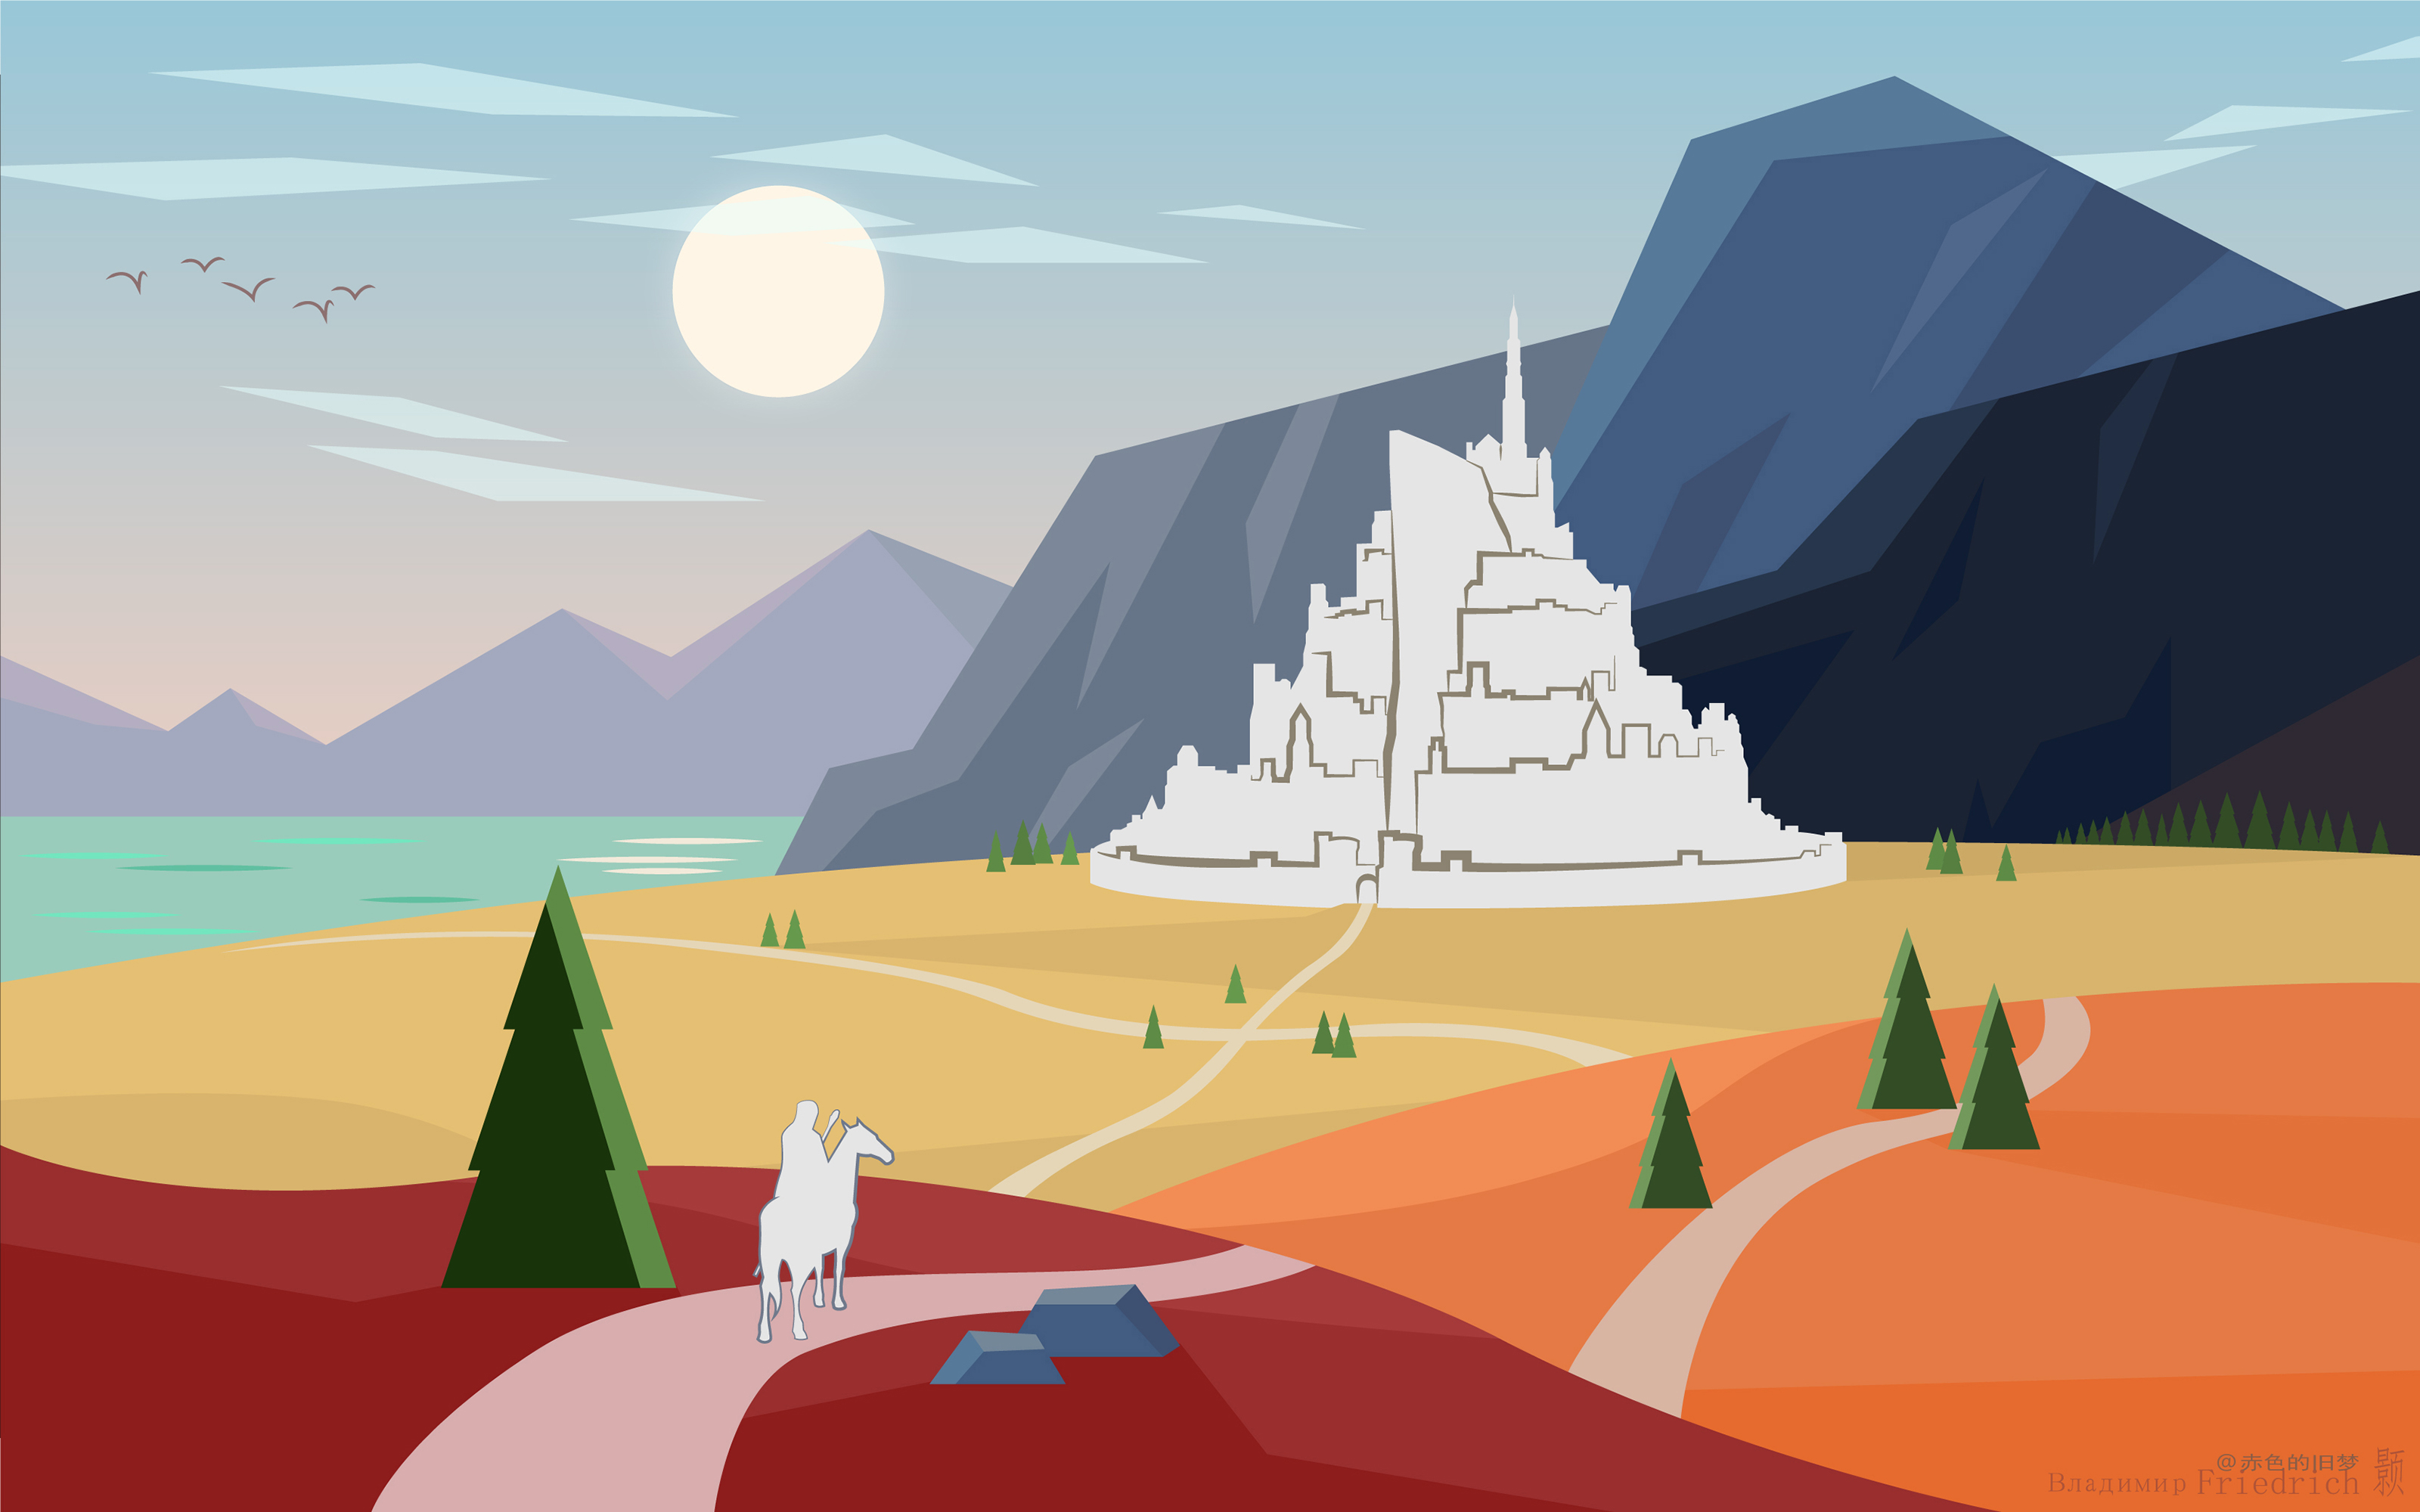 Gandalf, Flatdesign, landscape, The Lord of the Rings, Minas